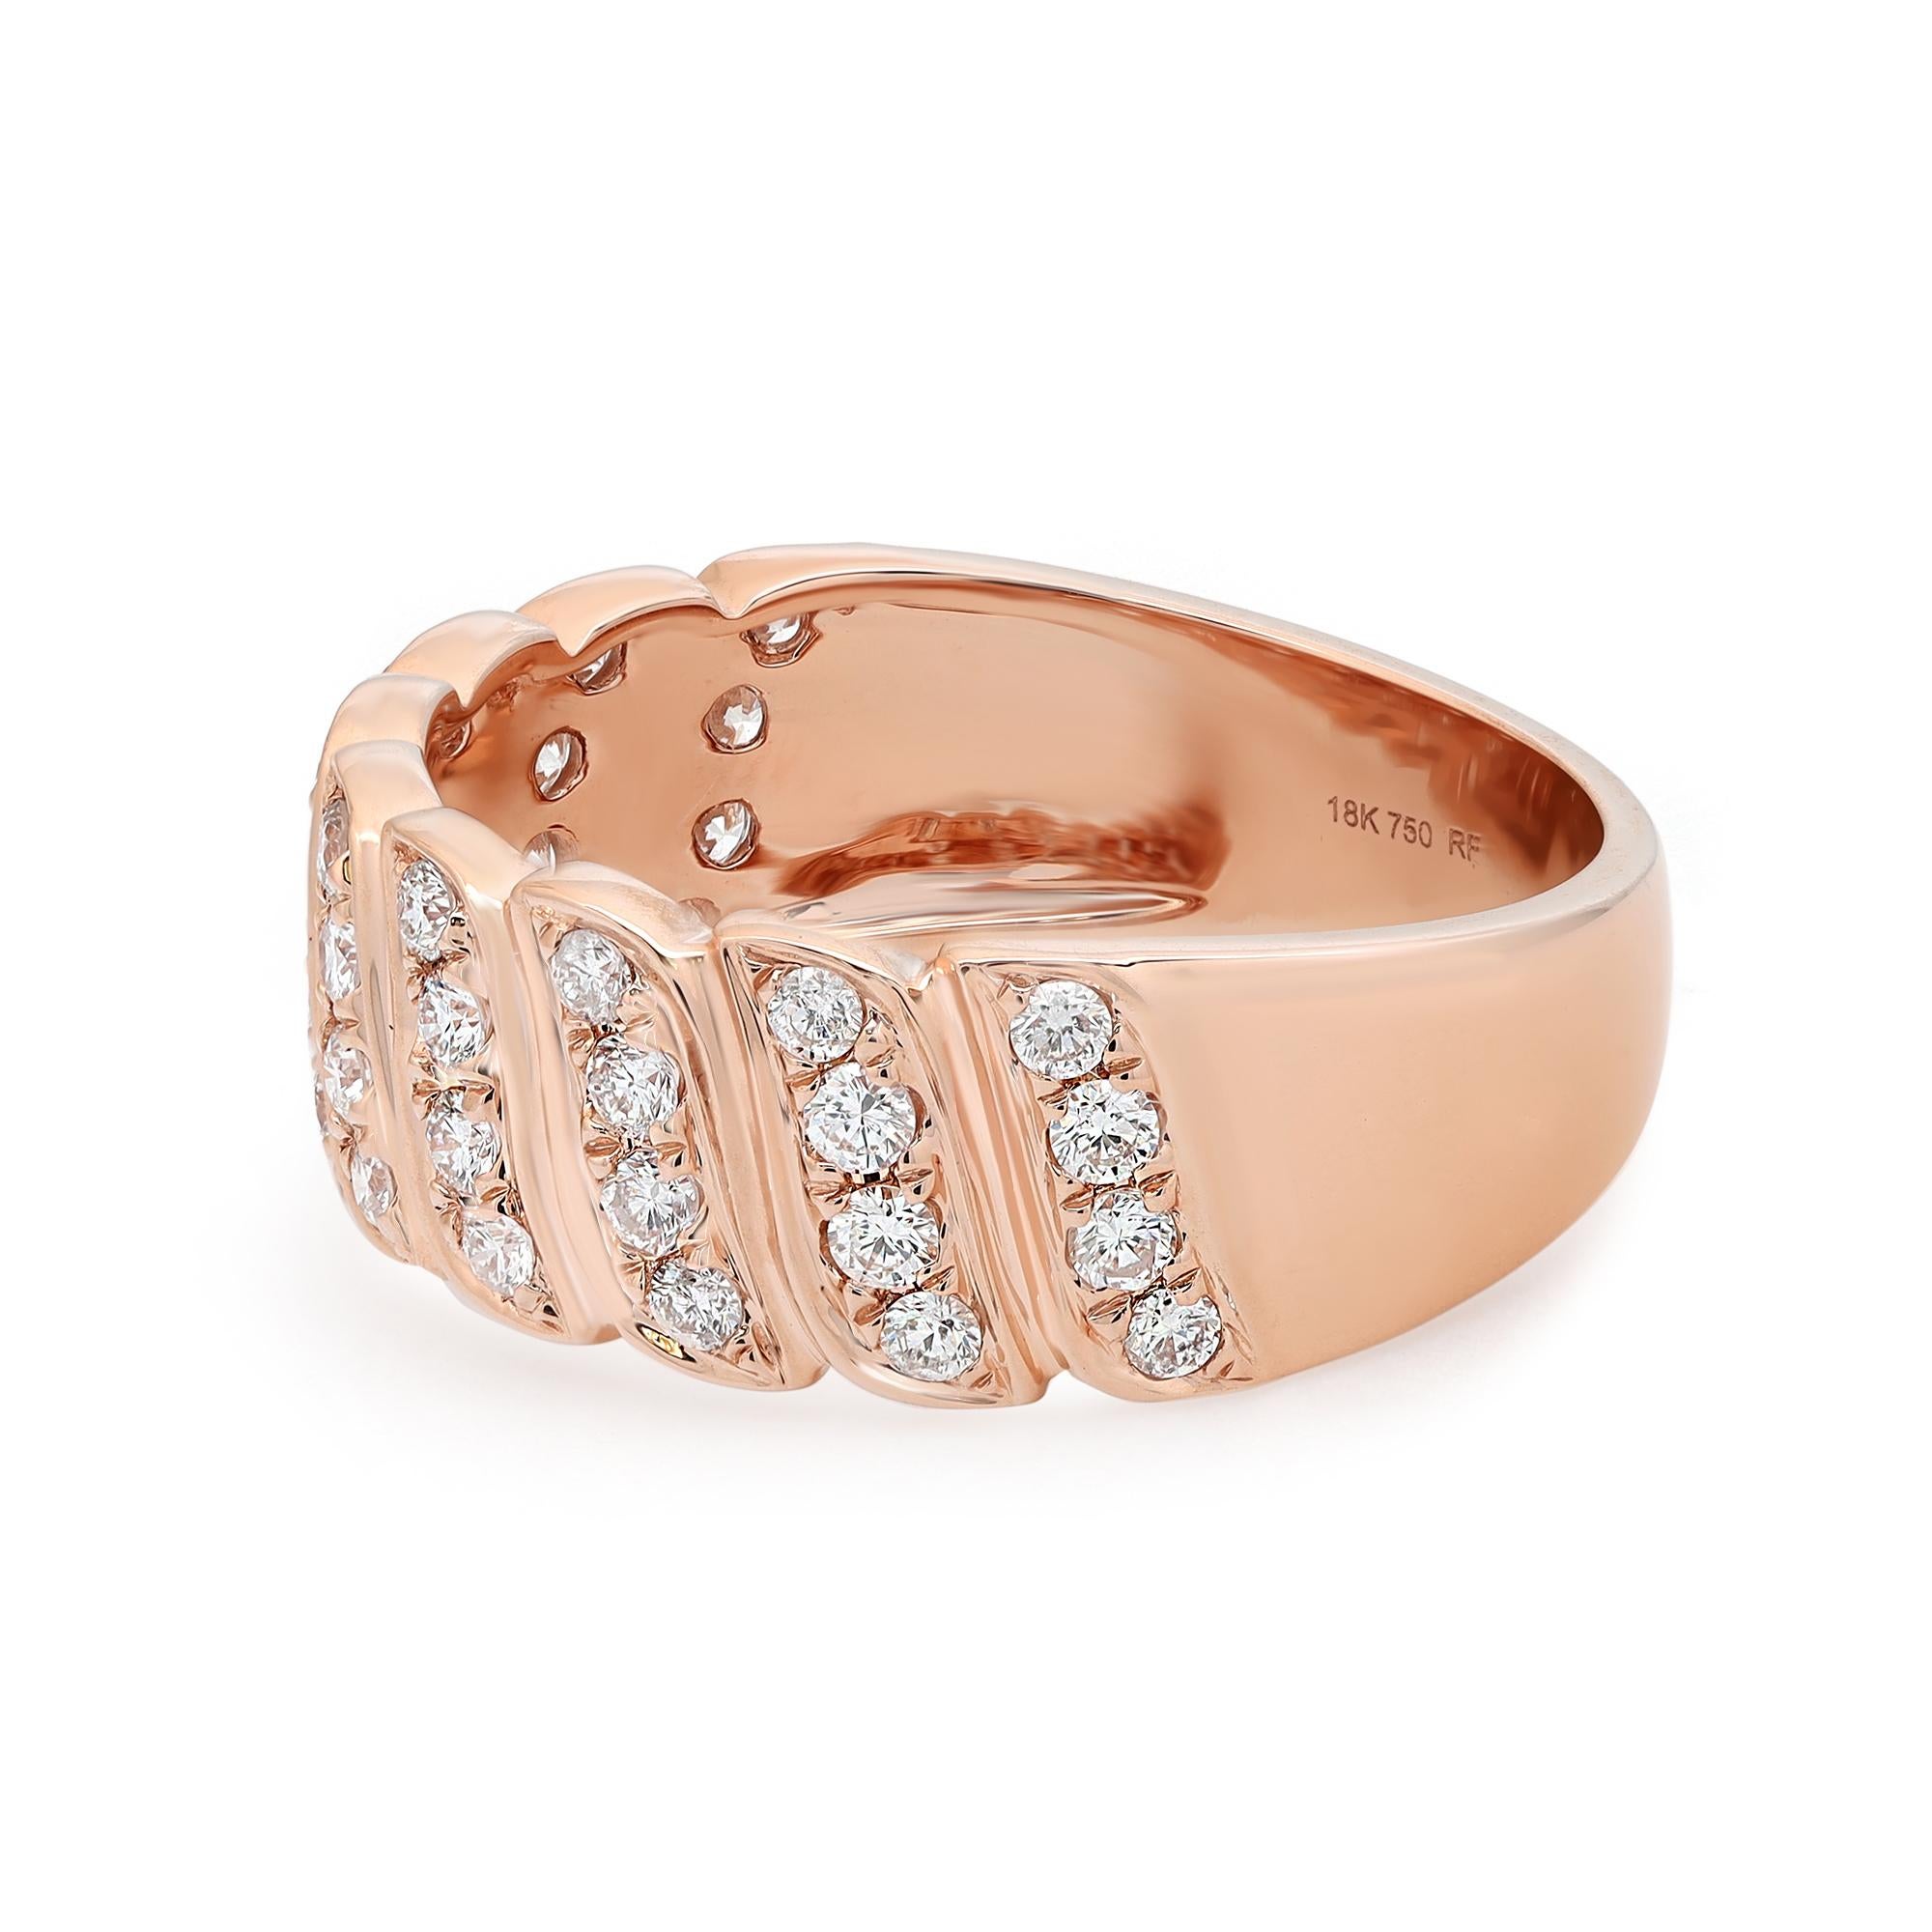 Rachel Koen 0.52Cttw Round Cut Diamond Band Ring 18K Rose Gold In New Condition For Sale In New York, NY